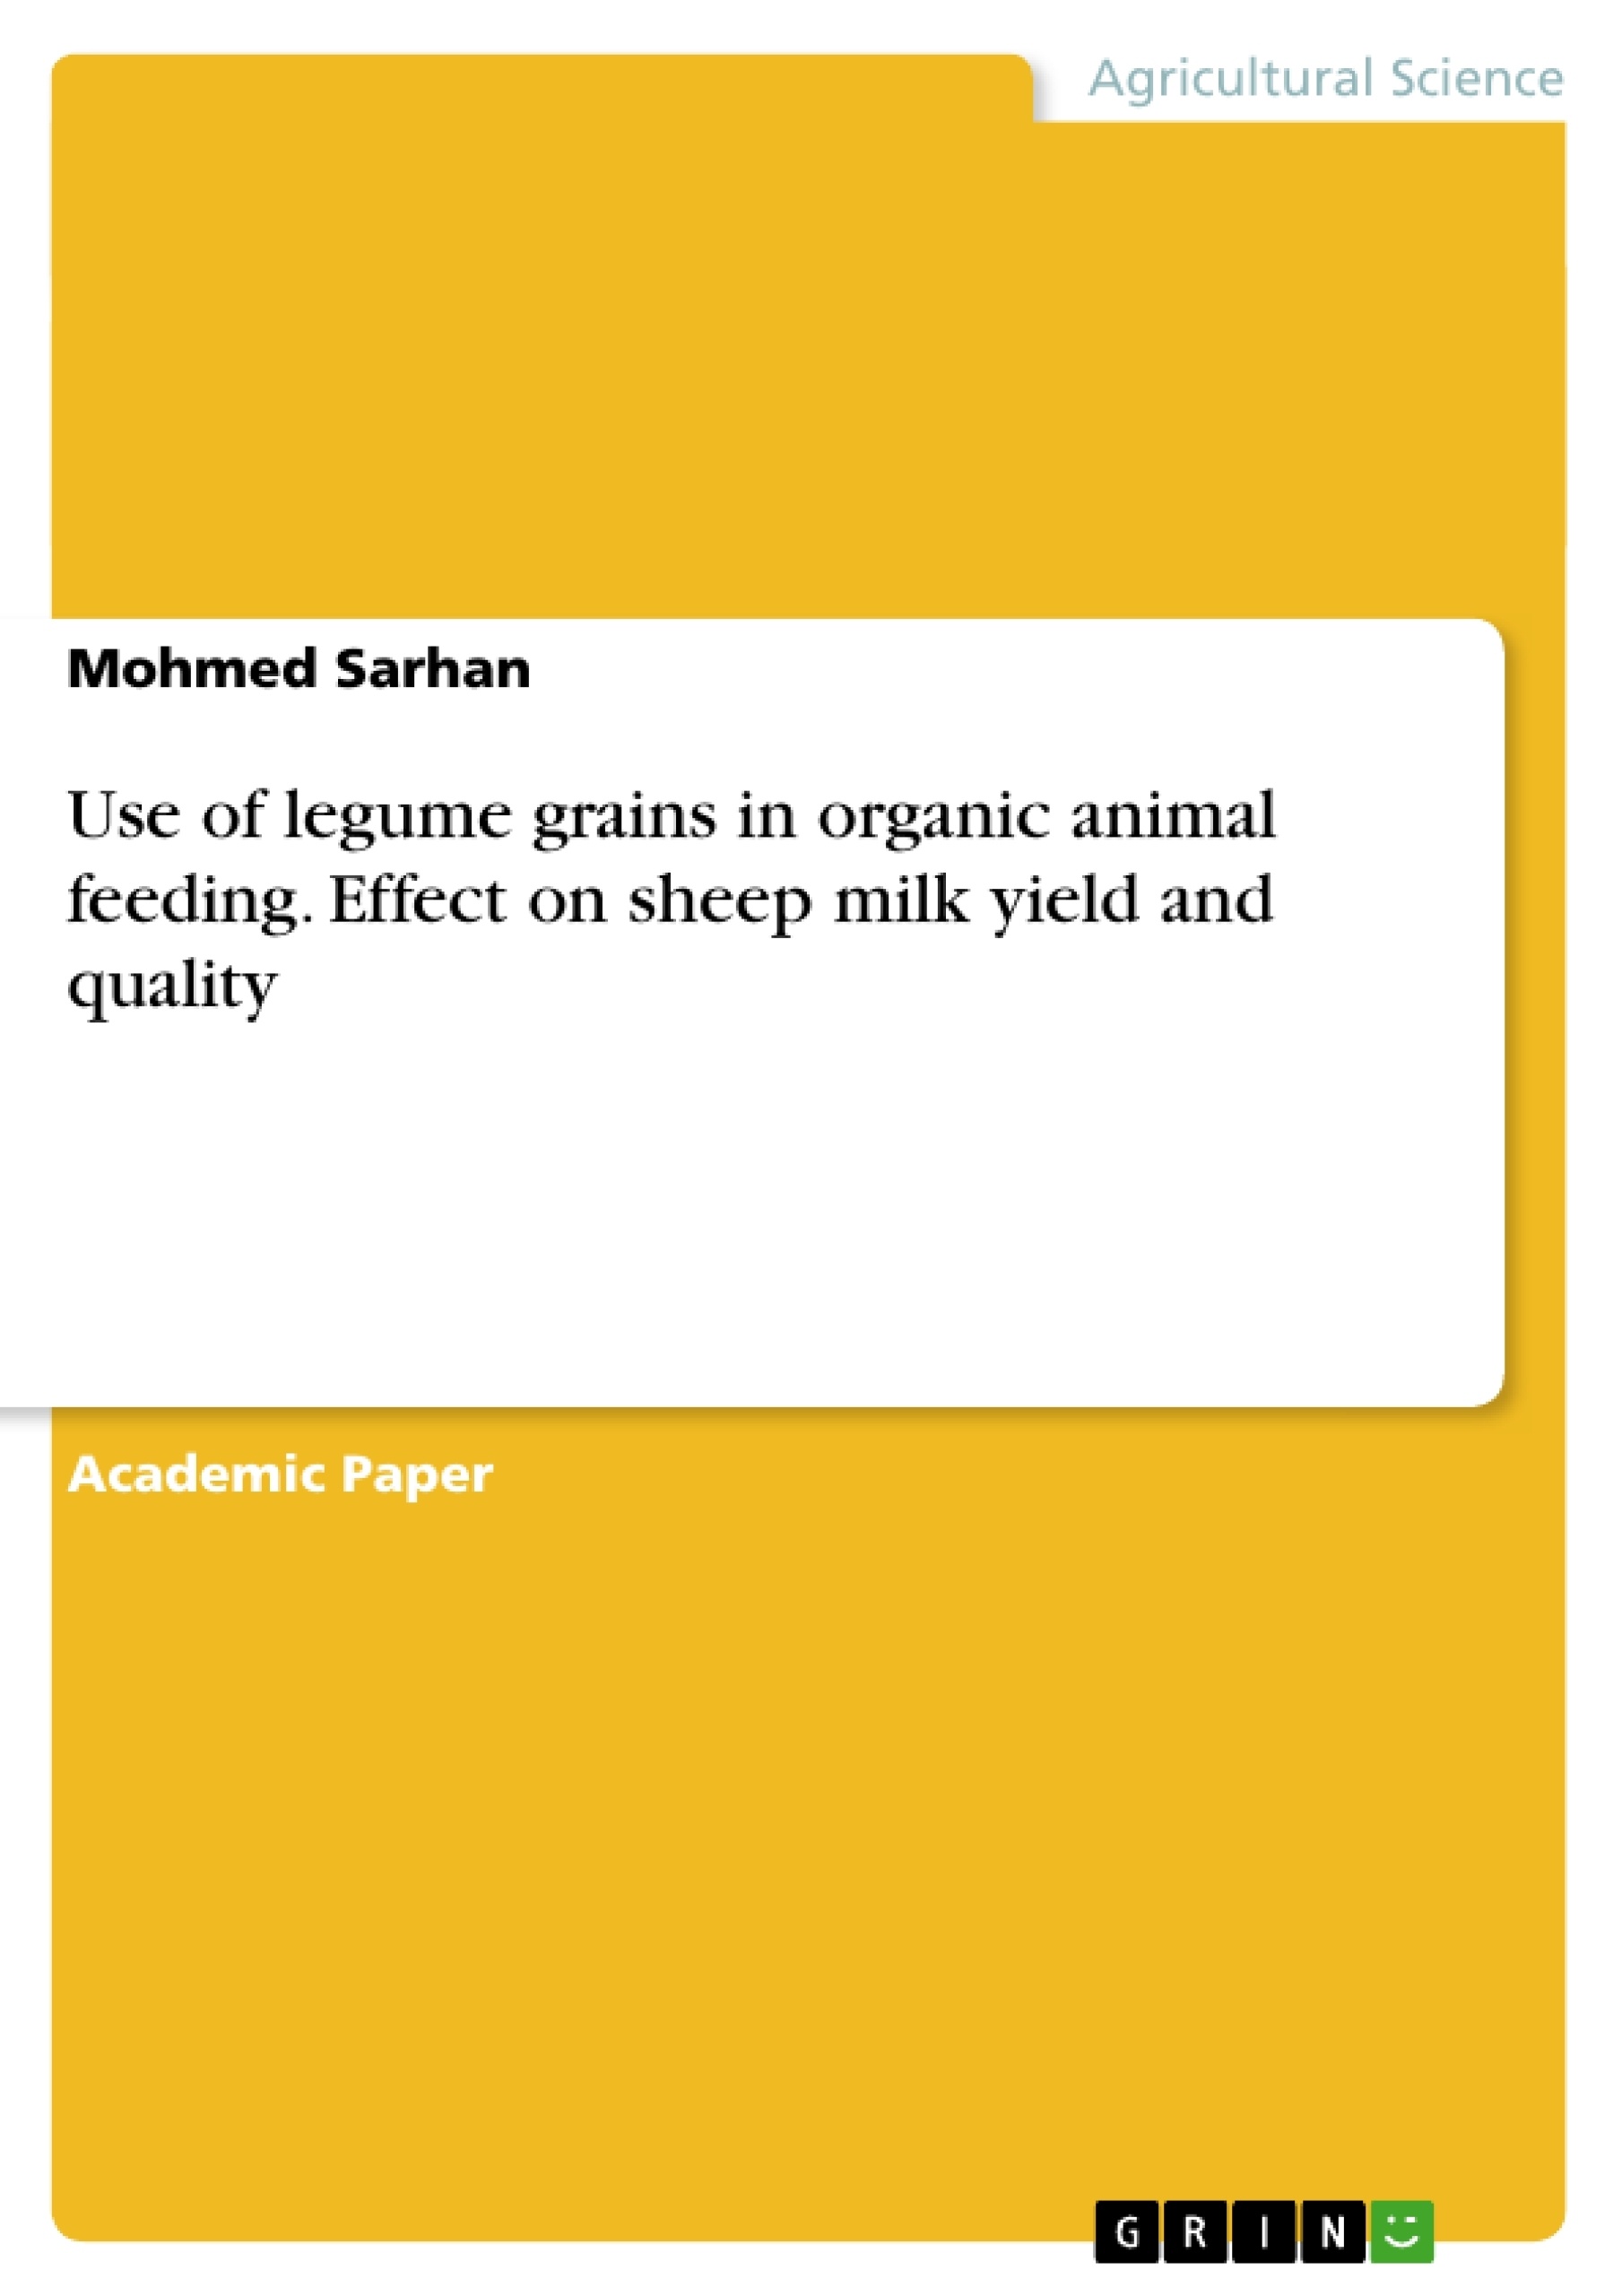 Title: Use of legume grains in organic animal feeding.  Effect on sheep milk yield and quality